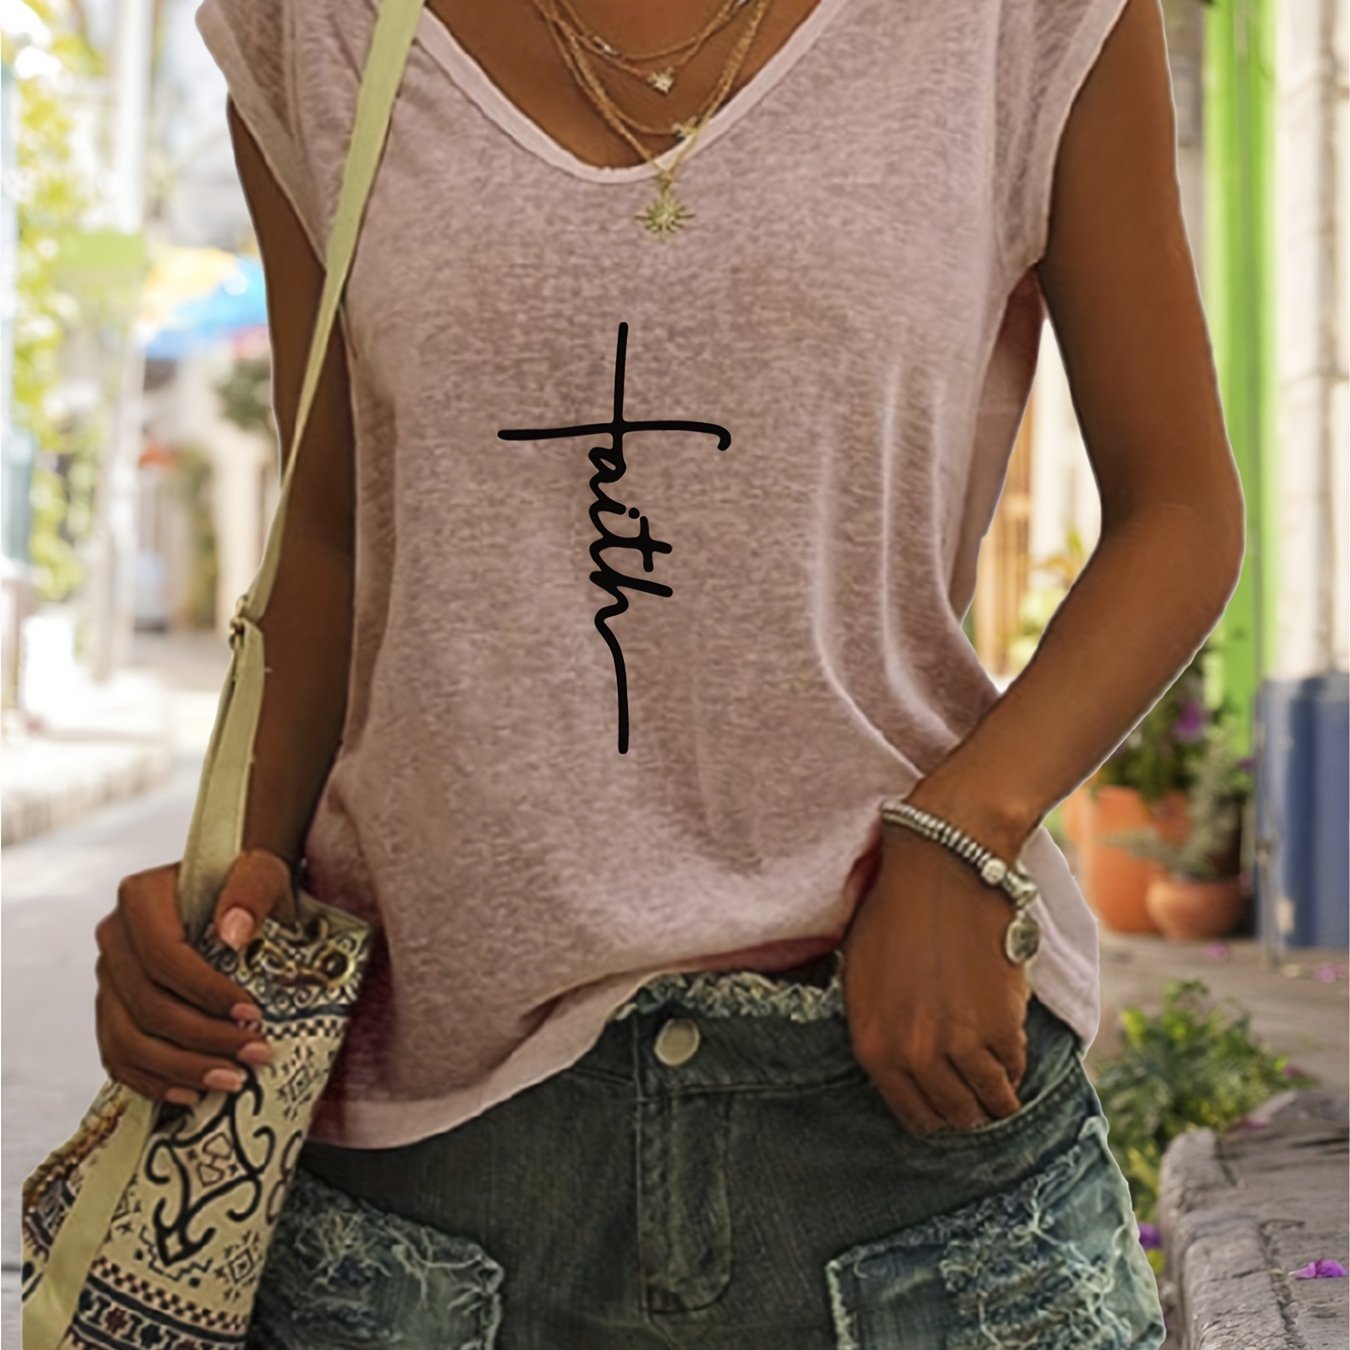 「binfenxie」Faith Letter Print Tank Top, Sleeveless V Neck Casual Top For Spring & Summer, Women's Clothing